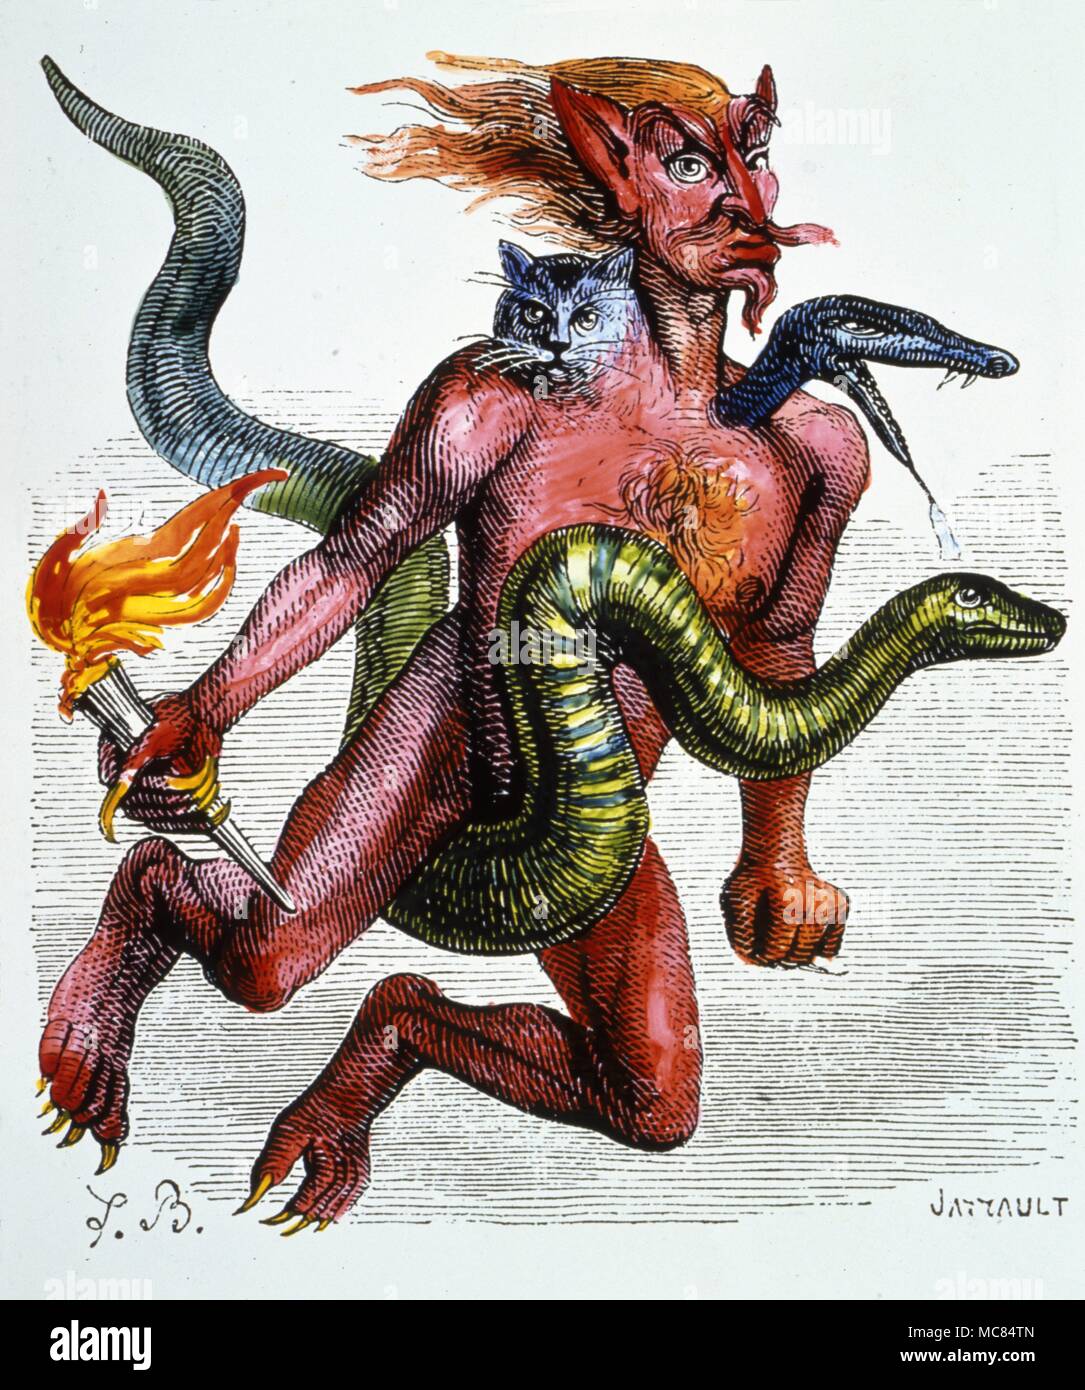 Haborym, the demon of incendiarism, from a hand-c9oloured print in Collin de Plancy's 'Dictionnaire Infernal' [1863]. Stock Photo